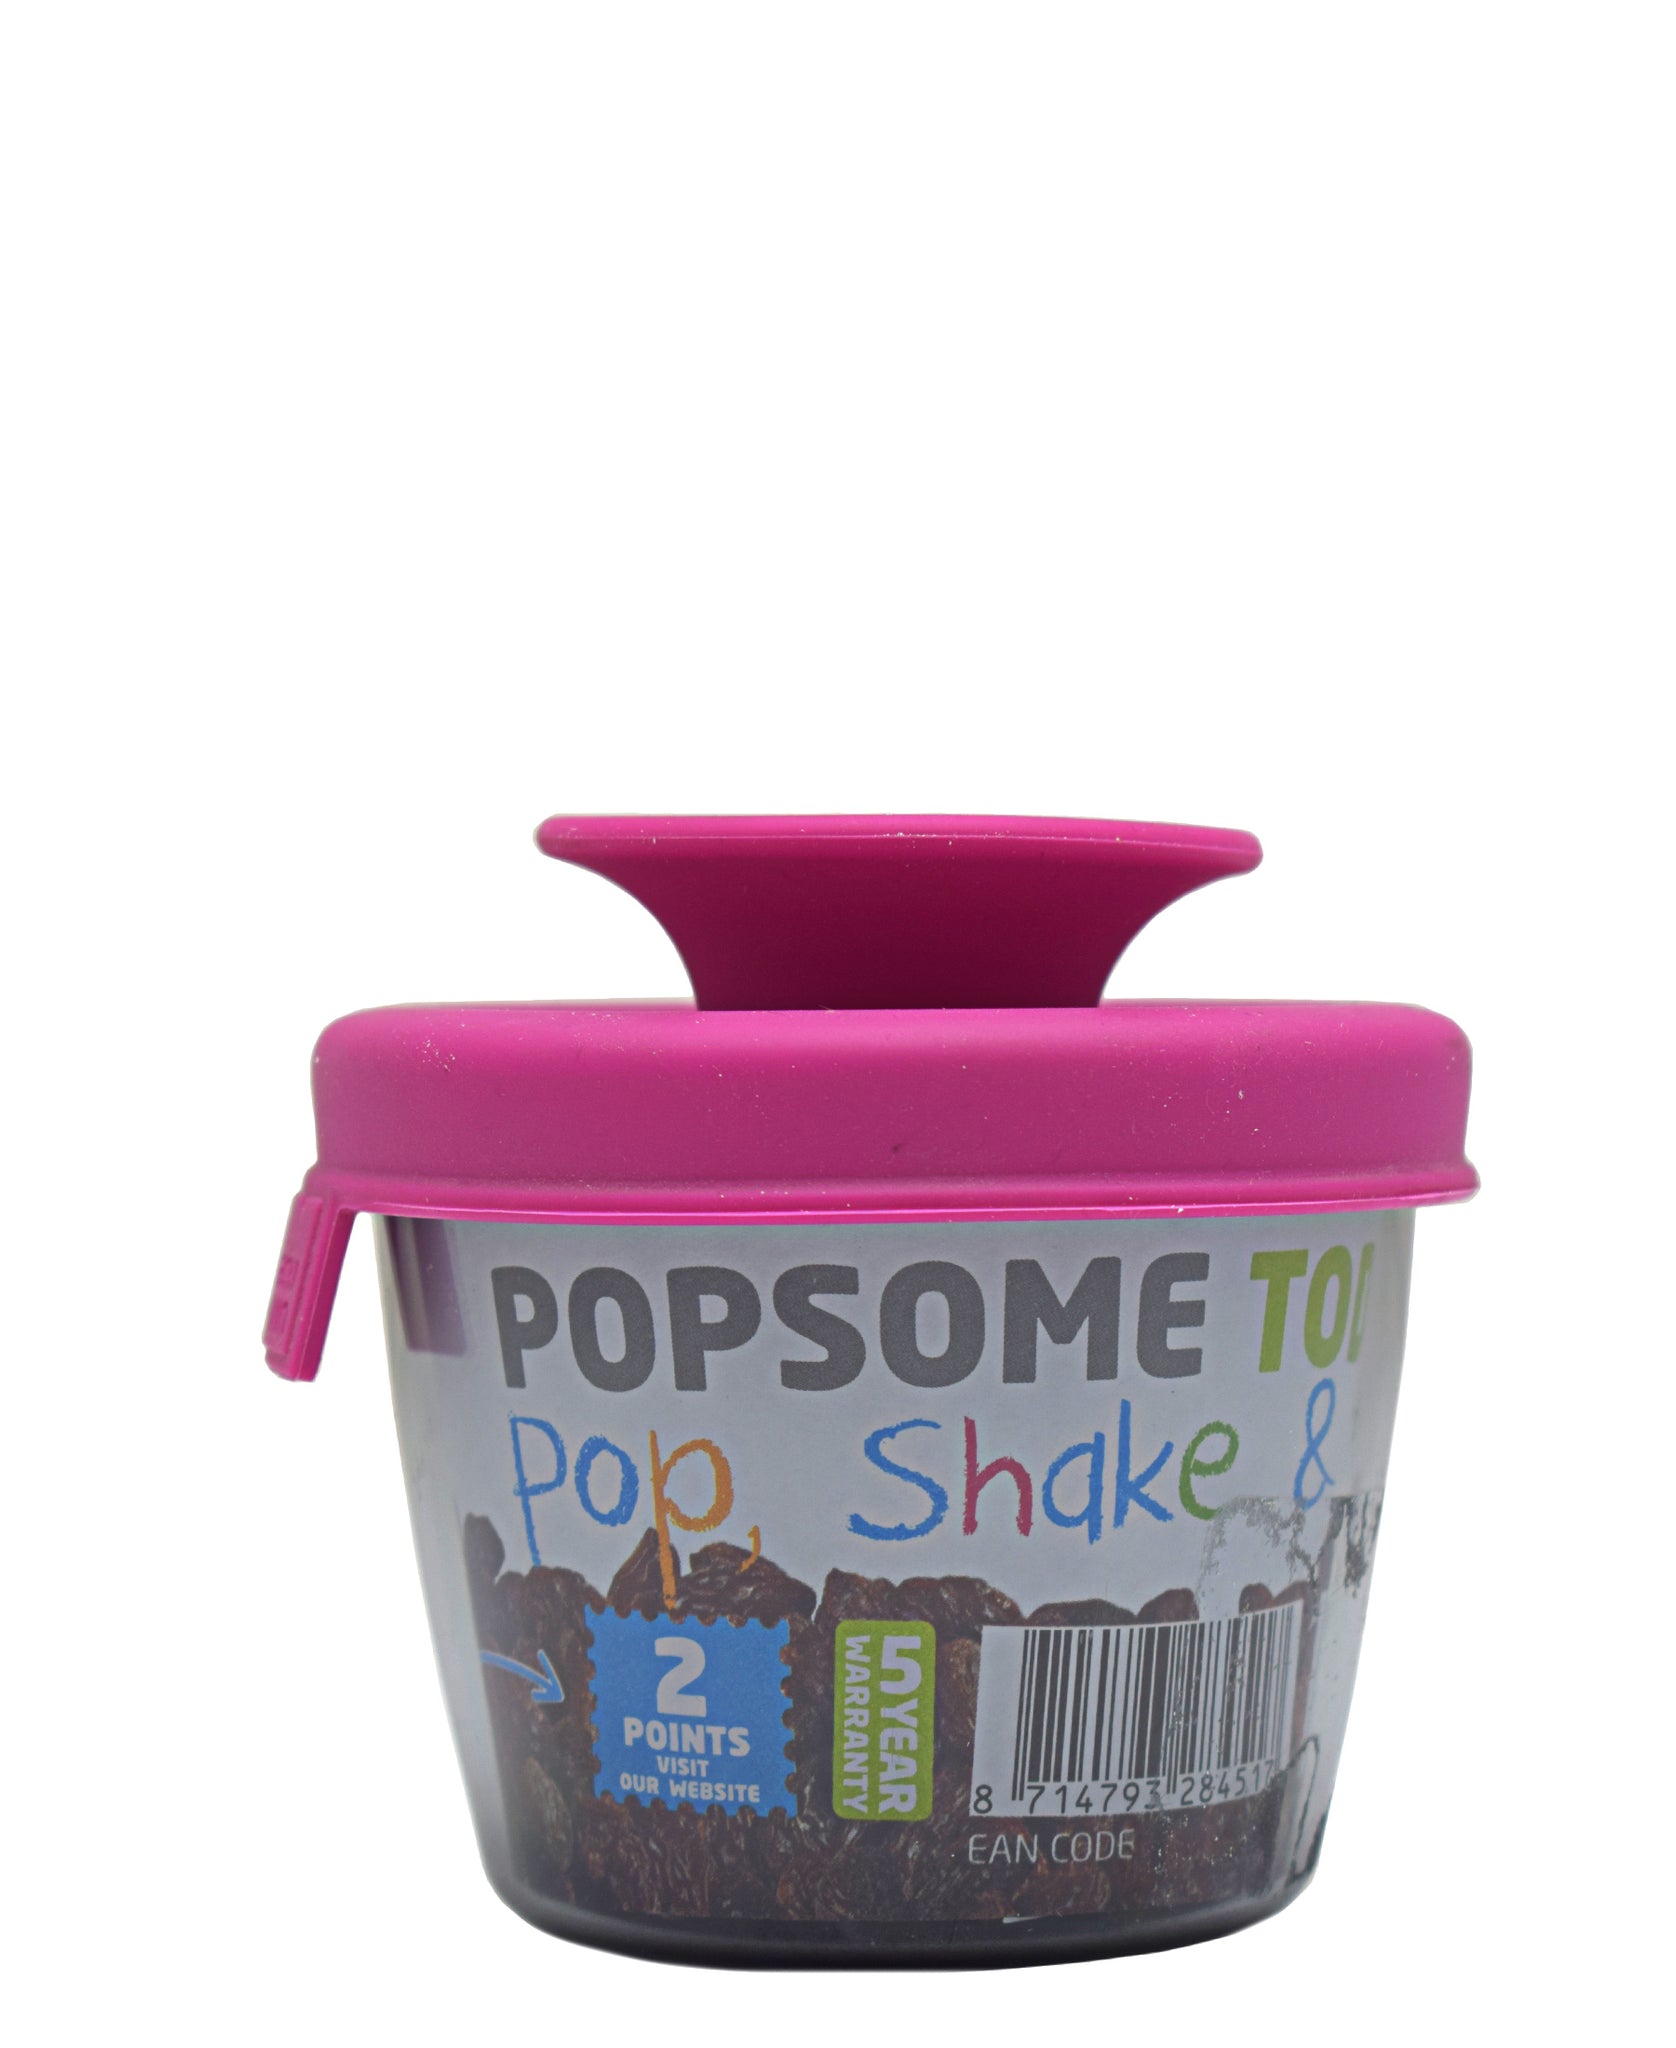 Tomorrows Kitchen Popsome Shaker - Pink